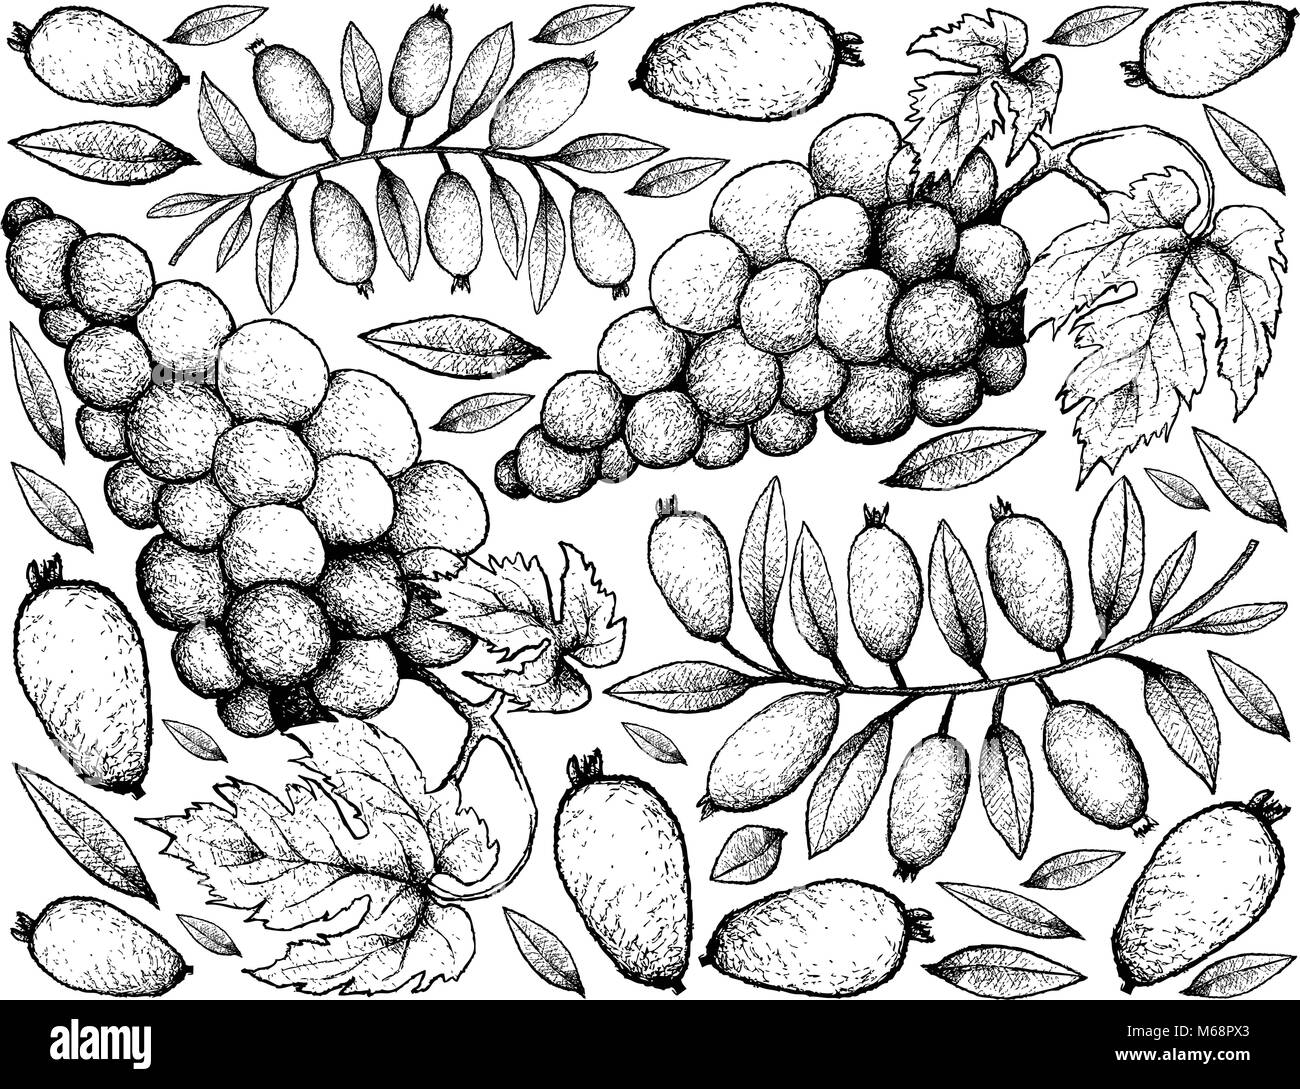 Berry Fruits, Illustration Wallpaper Background of Hand Drawn Sketch Bunch of Red Wine Grapes and Arrayan, Sartre Guava, Strawberry Guava or Calyptrop Stock Vector